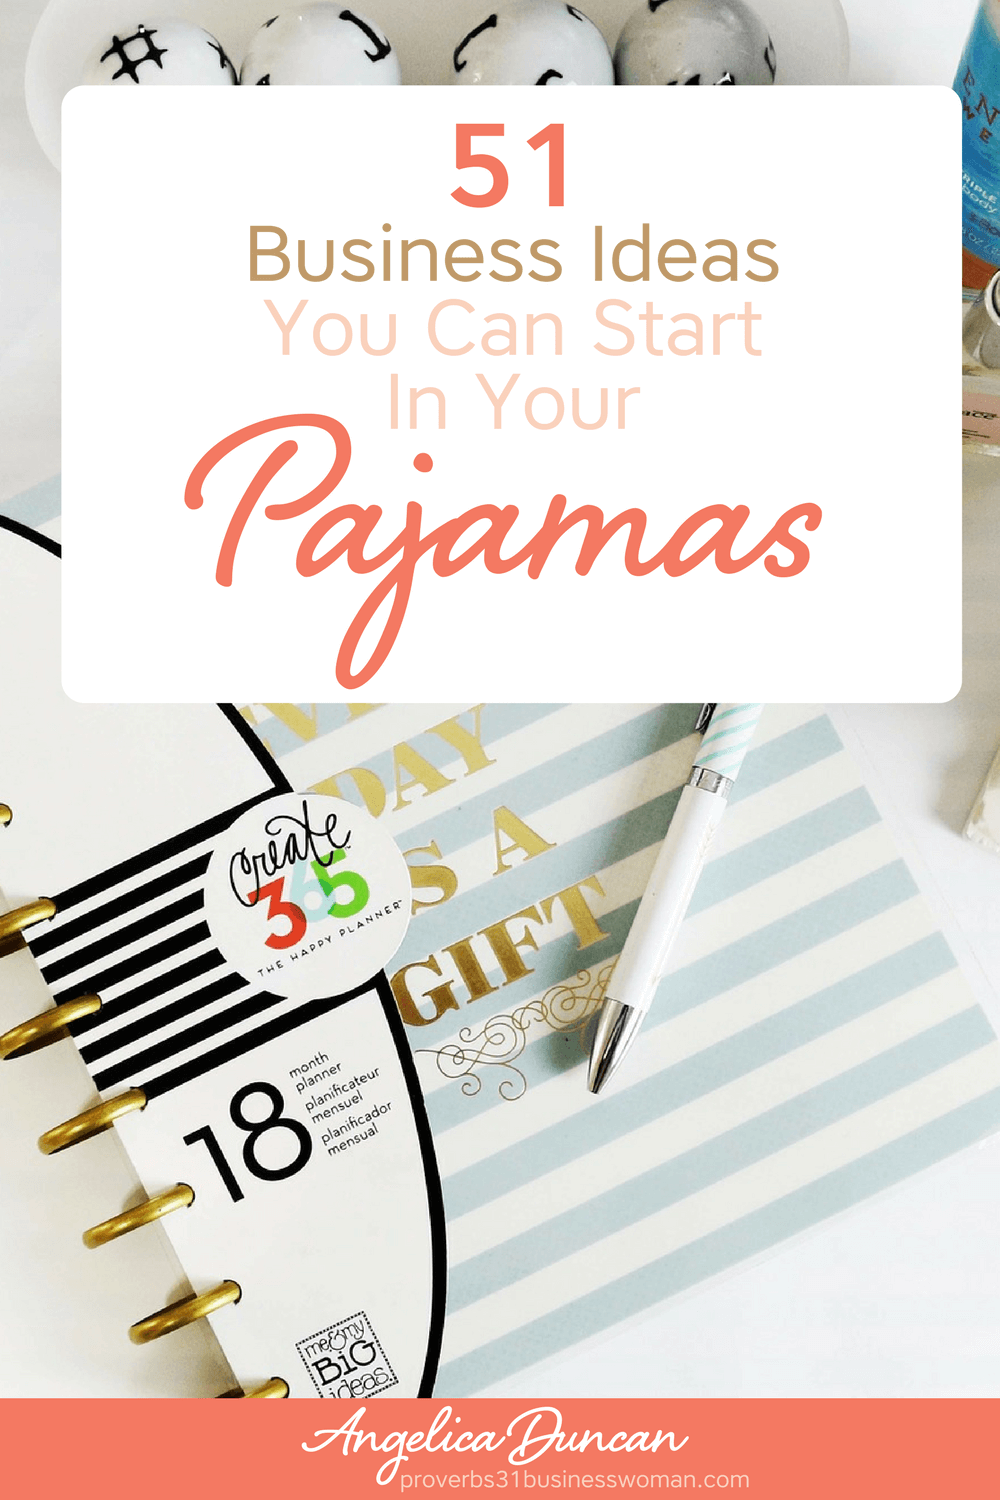 Need A Business Idea? Here are 51! Start your business by Monday...in your pajamas! #mompreneur #onlinebusiness #wahm #womeninbusiness #christianbusiness #christianwomeninbusiness #christianentrepreneurs #proverbs31 #proverbs31woman #proverbs31businesswoman #proverbs31enrepreneur #p31 #angelicaduncan #silkoversteel #sos